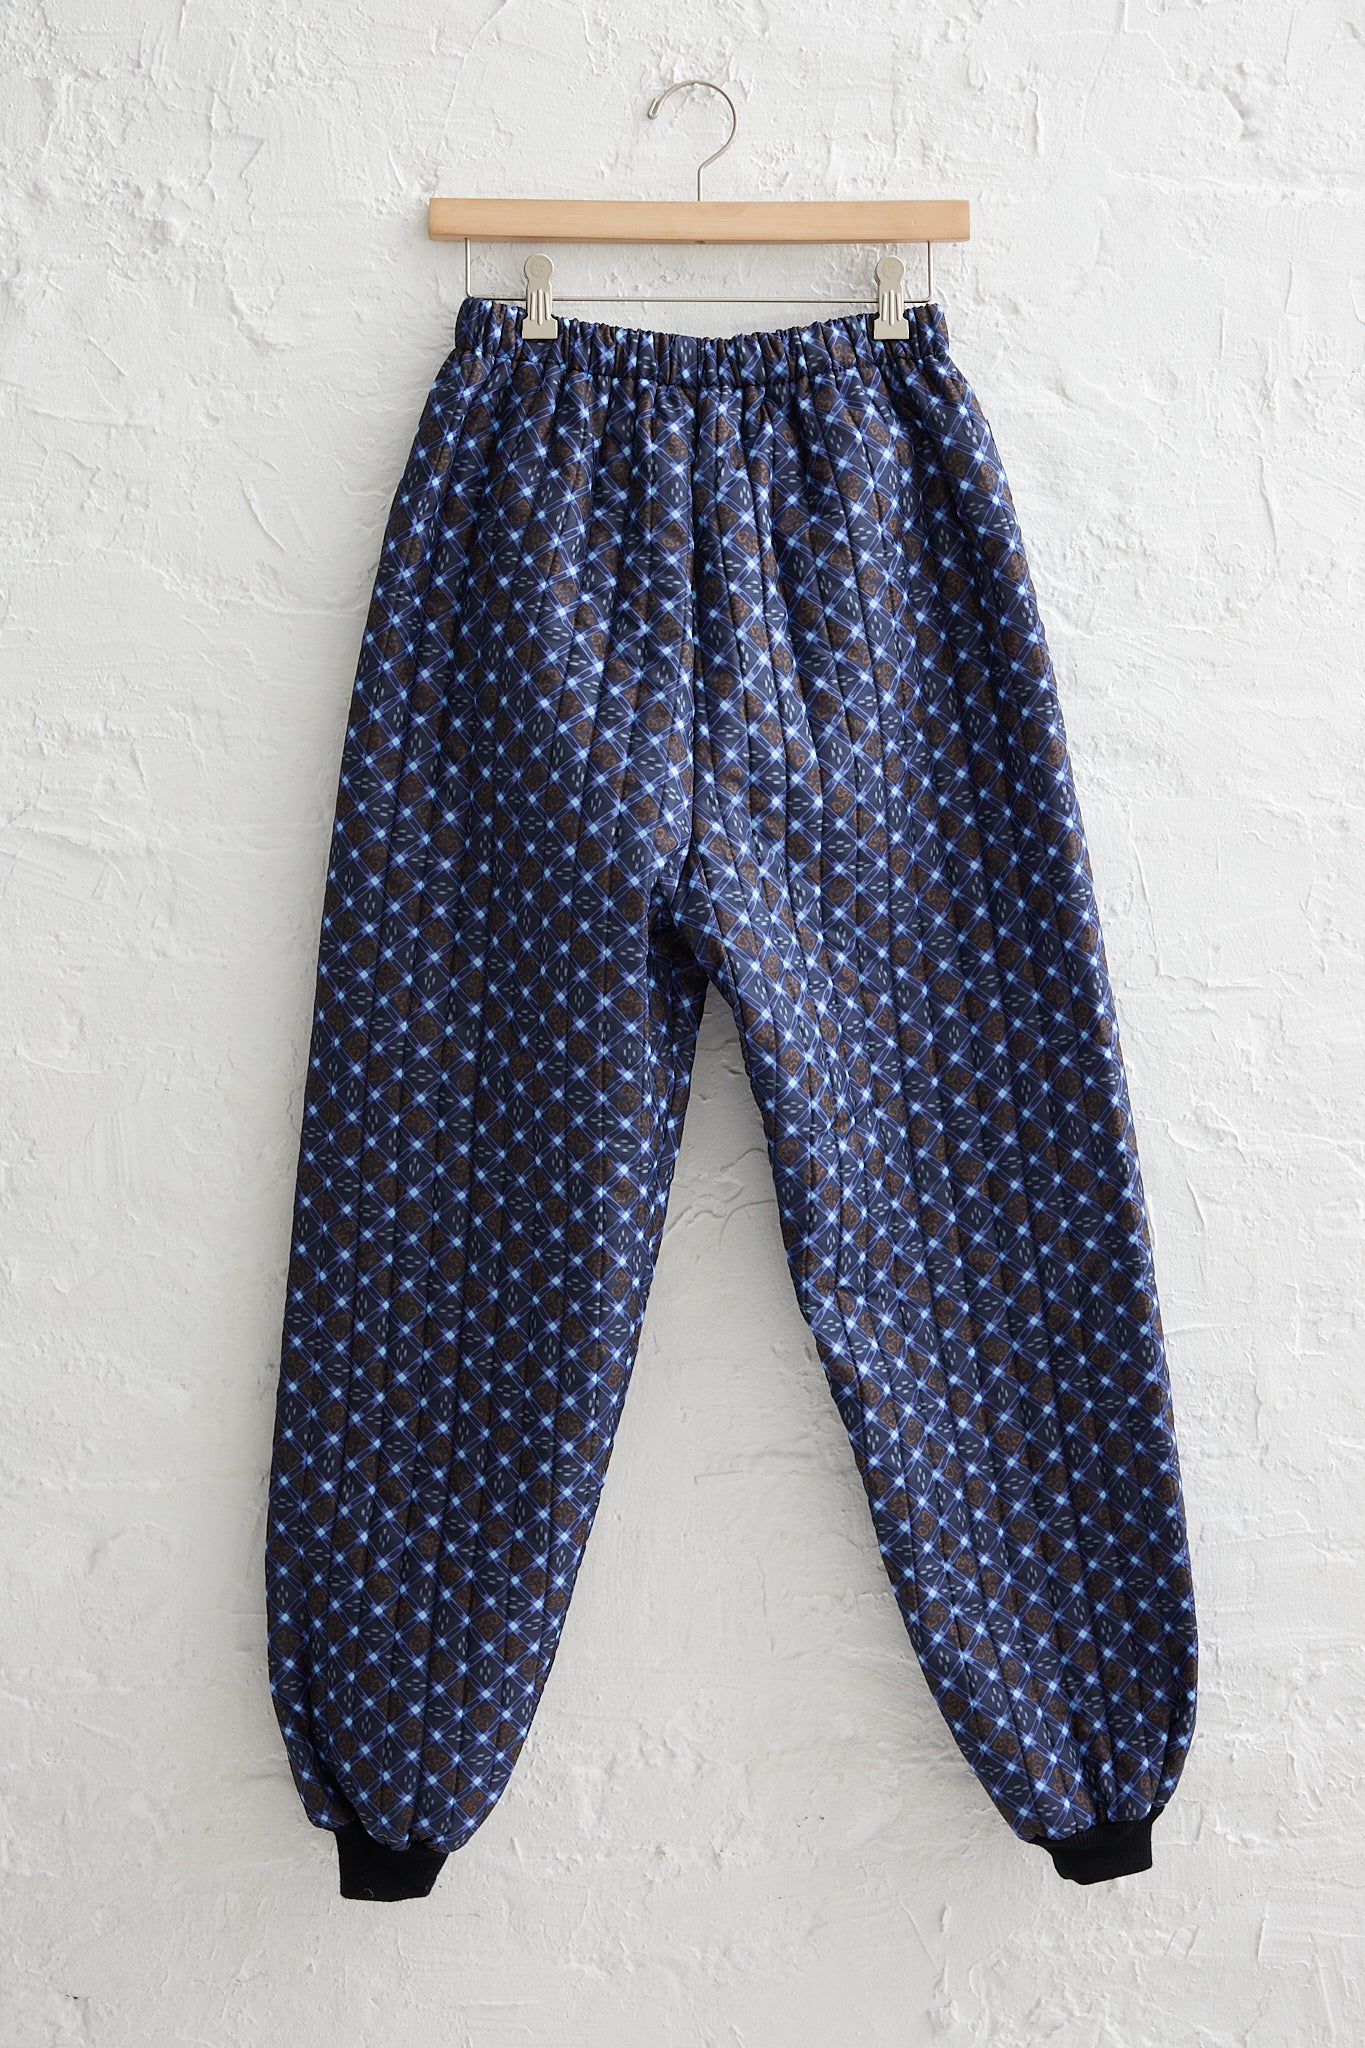 A pair of Bless Monpe Pant No. 08 in Floral Print B - S with an elasticated waist hanging on a white wall.